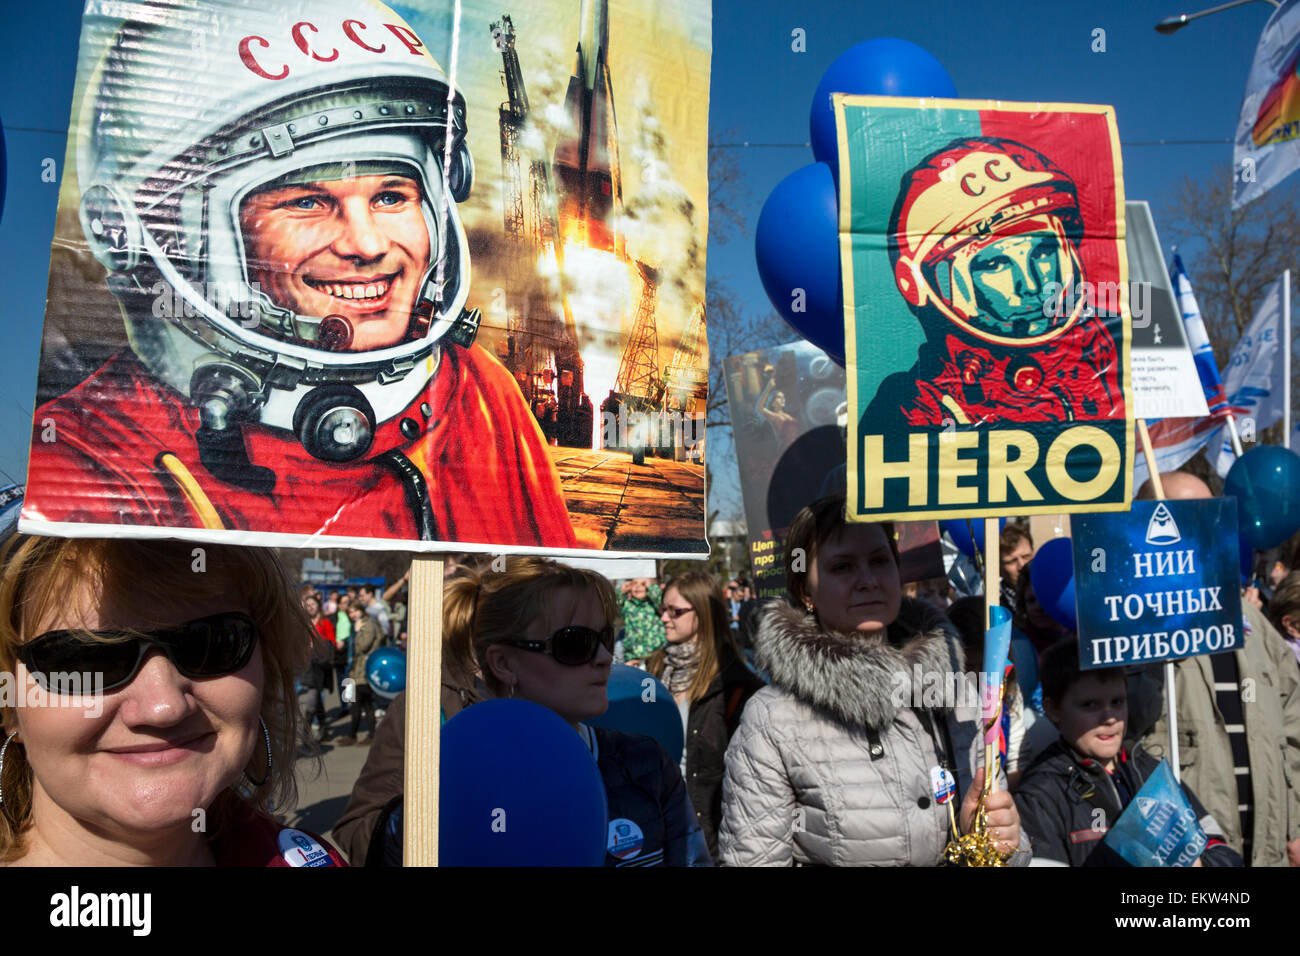 Russia, Moscow, 12 of April 2015: Participants in the Star Parade hold portraits of the first cosmonaut Yuri Gagarin on Cosmonautics Day march by the central alley at the Exhibition of Achievements of the National Economy in Moscow Stock Photo